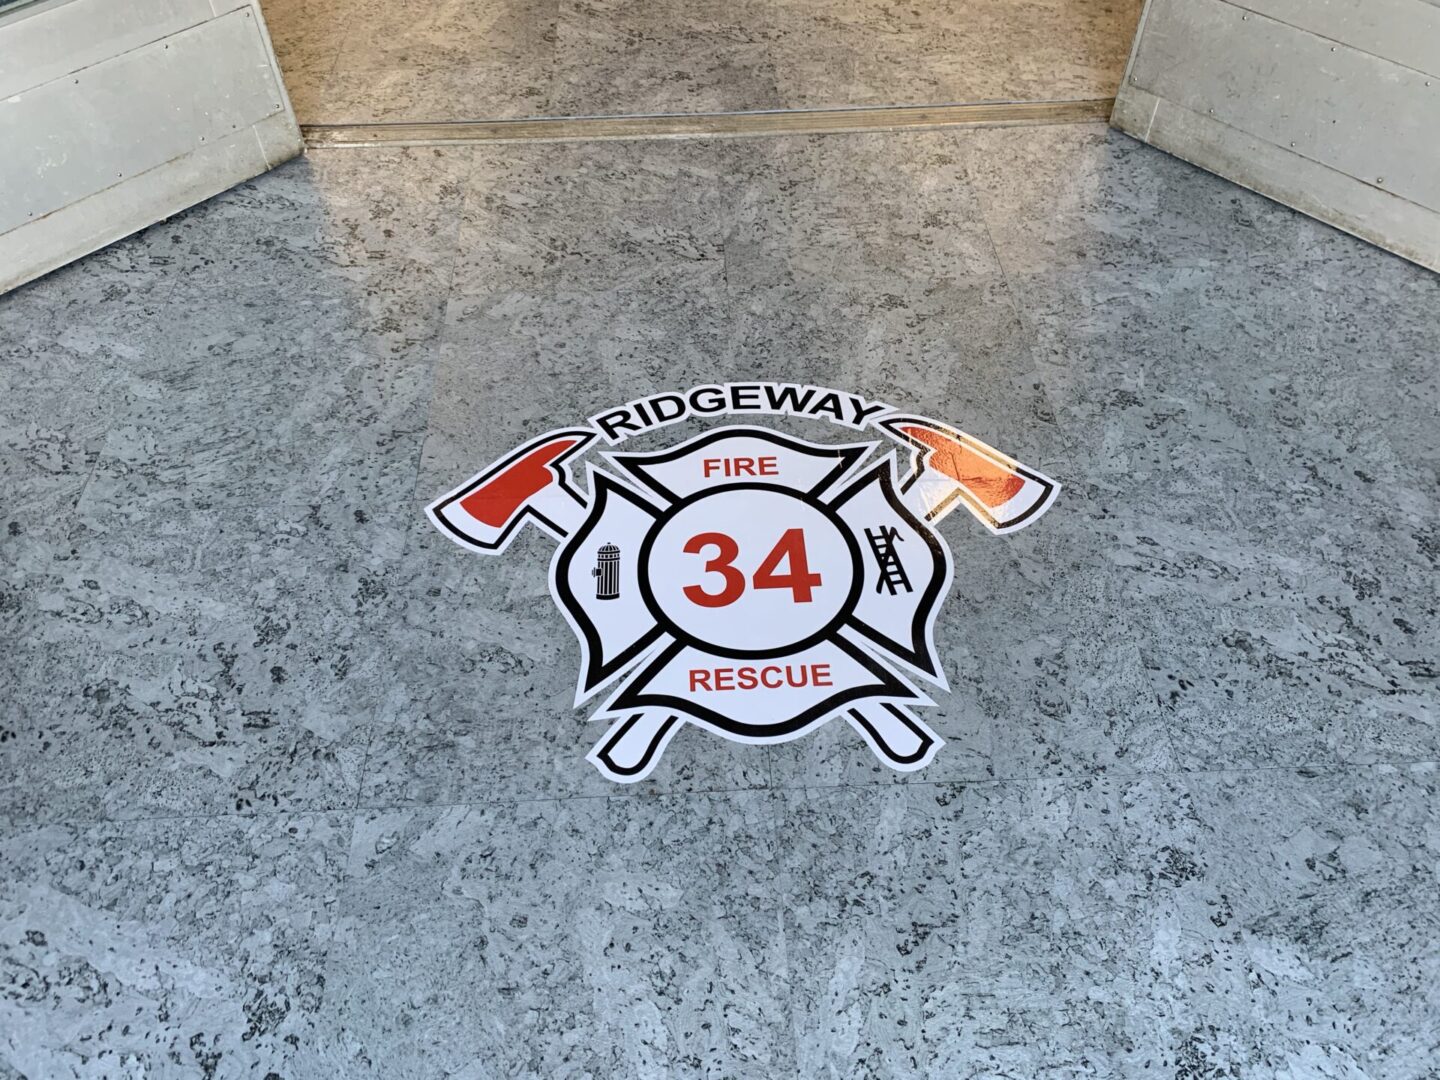 A fire department logo is shown on the floor.